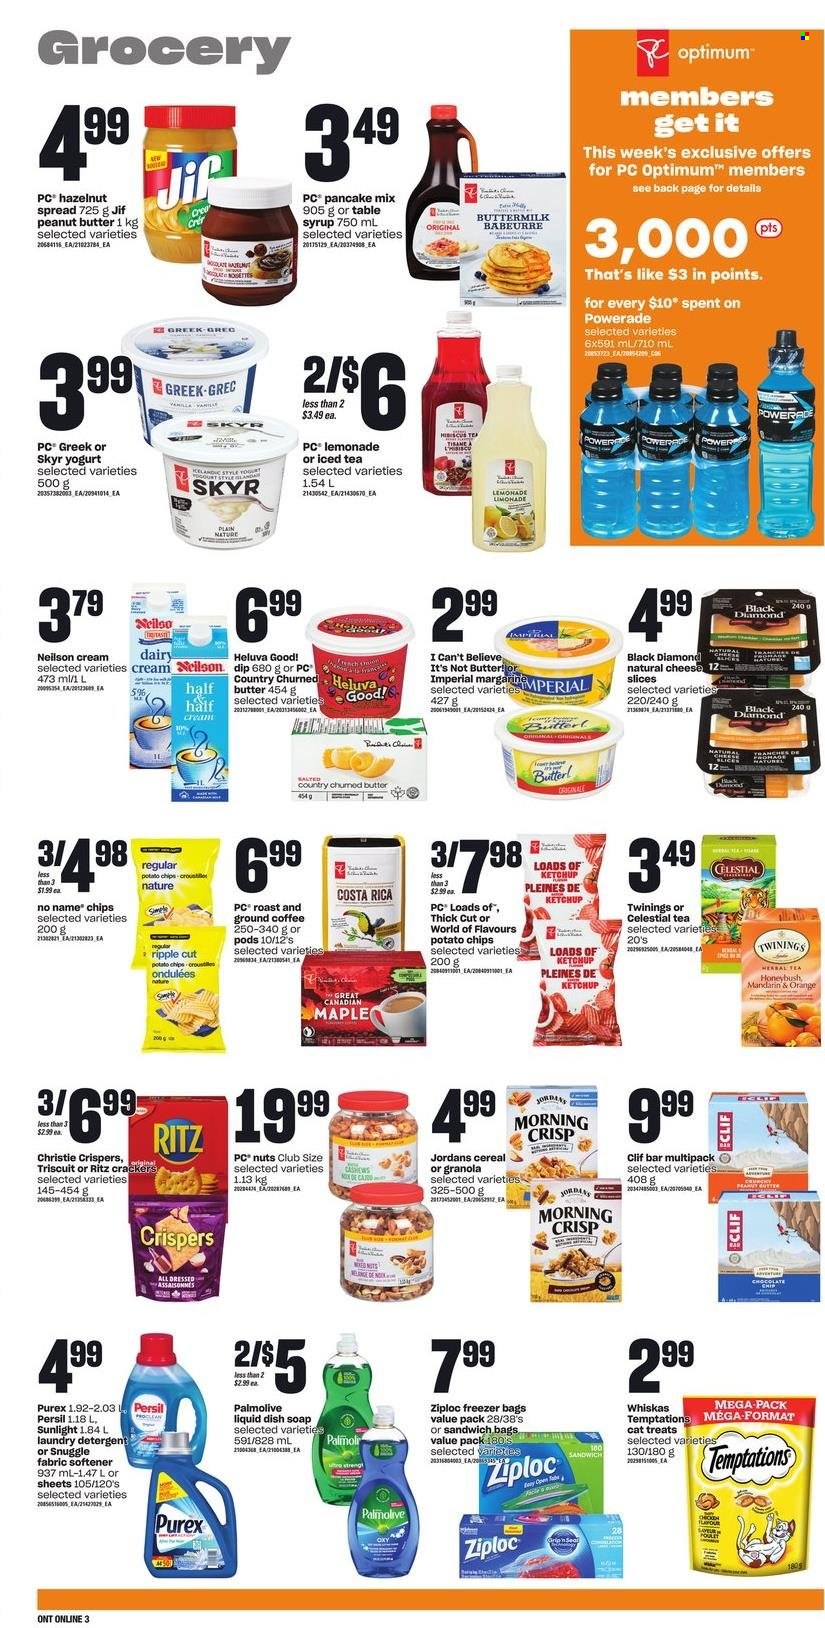 thumbnail - Zehrs Flyer - May 19, 2022 - May 25, 2022 - Sales products - mandarines, No Name, pancakes, cheese, yoghurt, buttermilk, dip, chocolate, crackers, RITZ, potato chips, chips, cereals, peanut butter, syrup, hazelnut spread, Jif, lemonade, Powerade, ice tea, Twinings, coffee, ground coffee, Snuggle, Persil, fabric softener, laundry detergent, Sunlight, Purex, Palmolive, soap, bag, Ziploc, freezer bag, Optimum, table, detergent, granola, ketchup, Whiskas. Page 7.